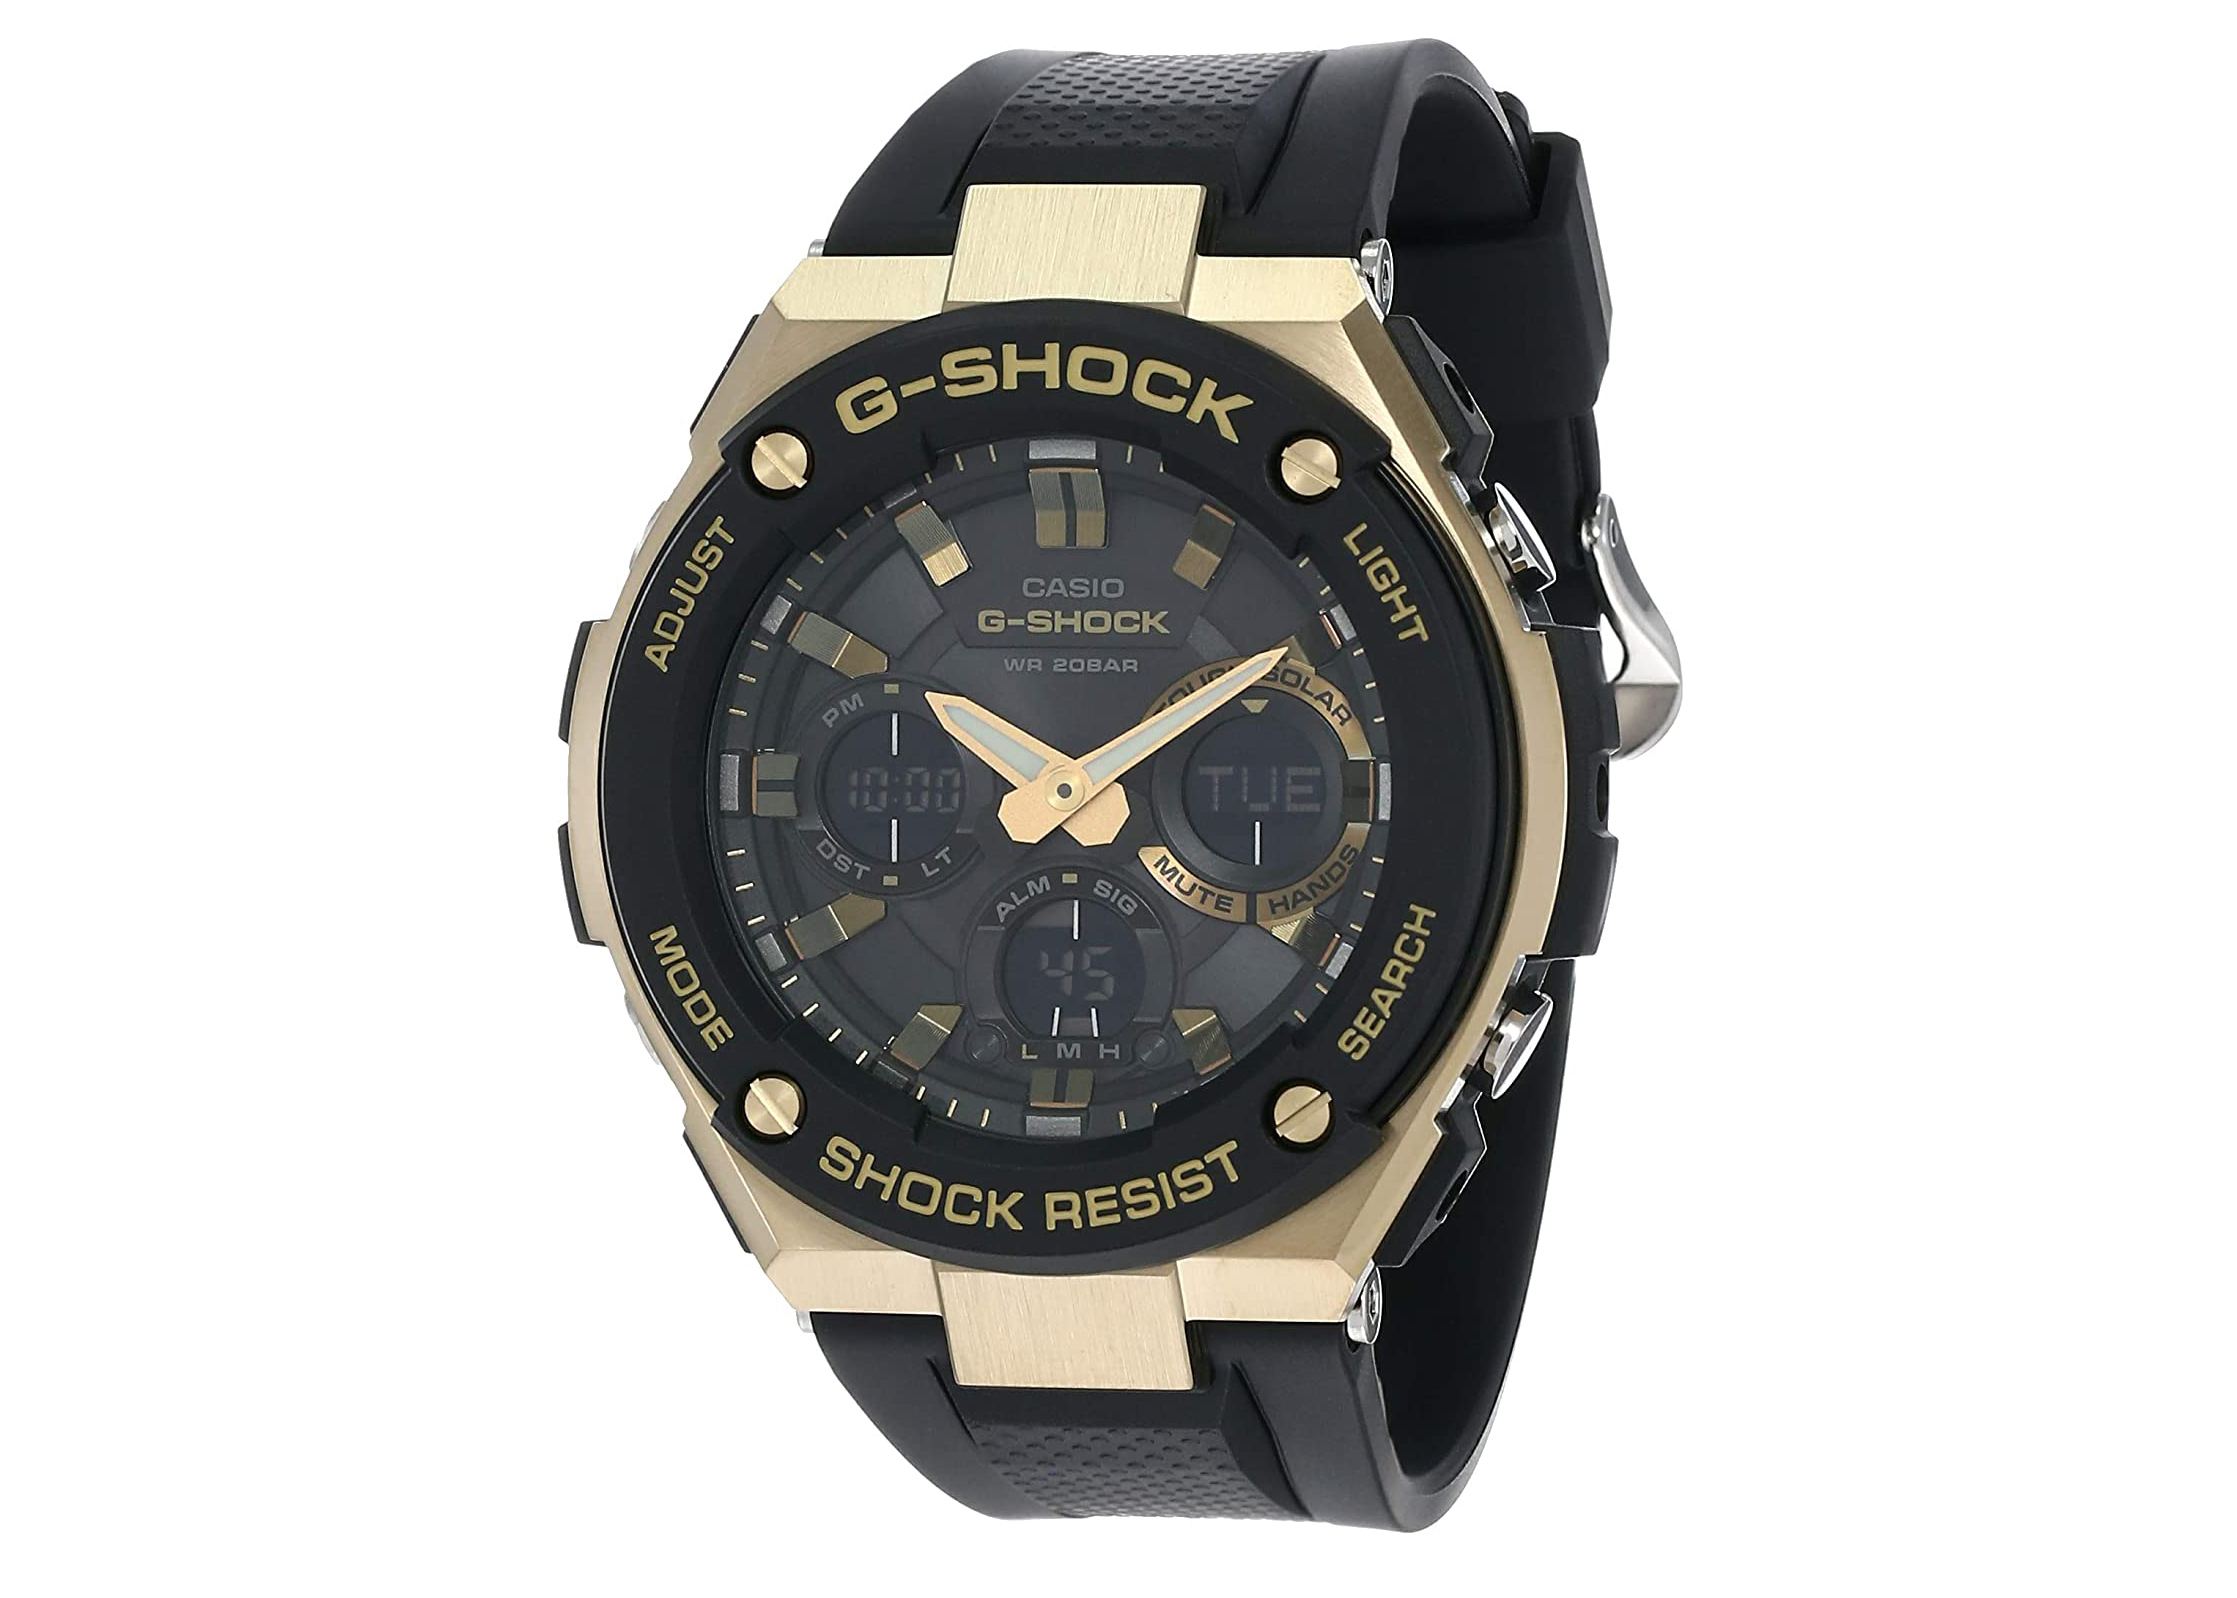 Casio G-Shock GST-S100G-1A - 53mm in Stainless Steel - US